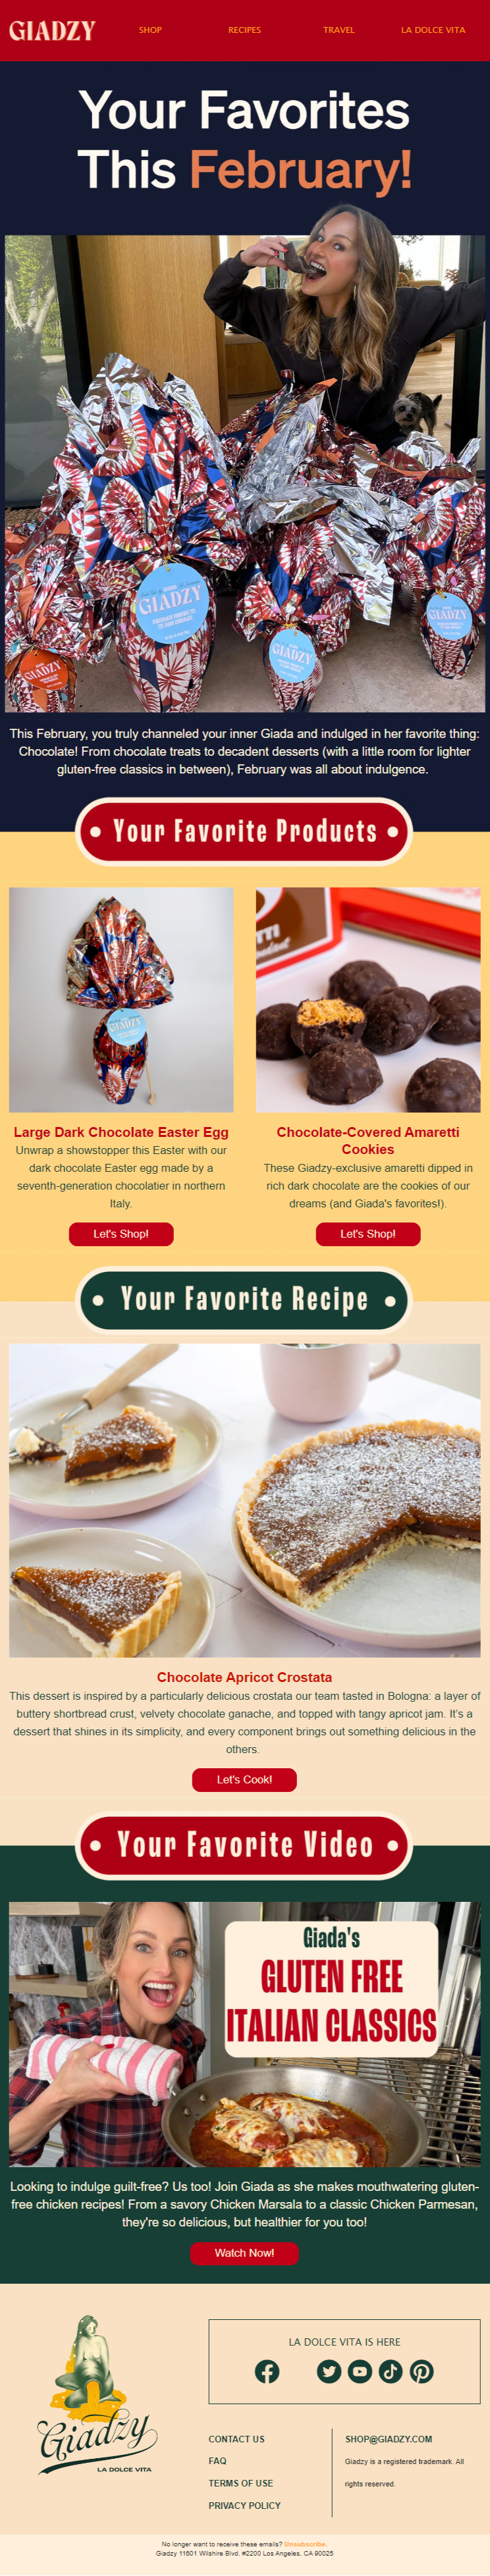 Giadzy_Easter email